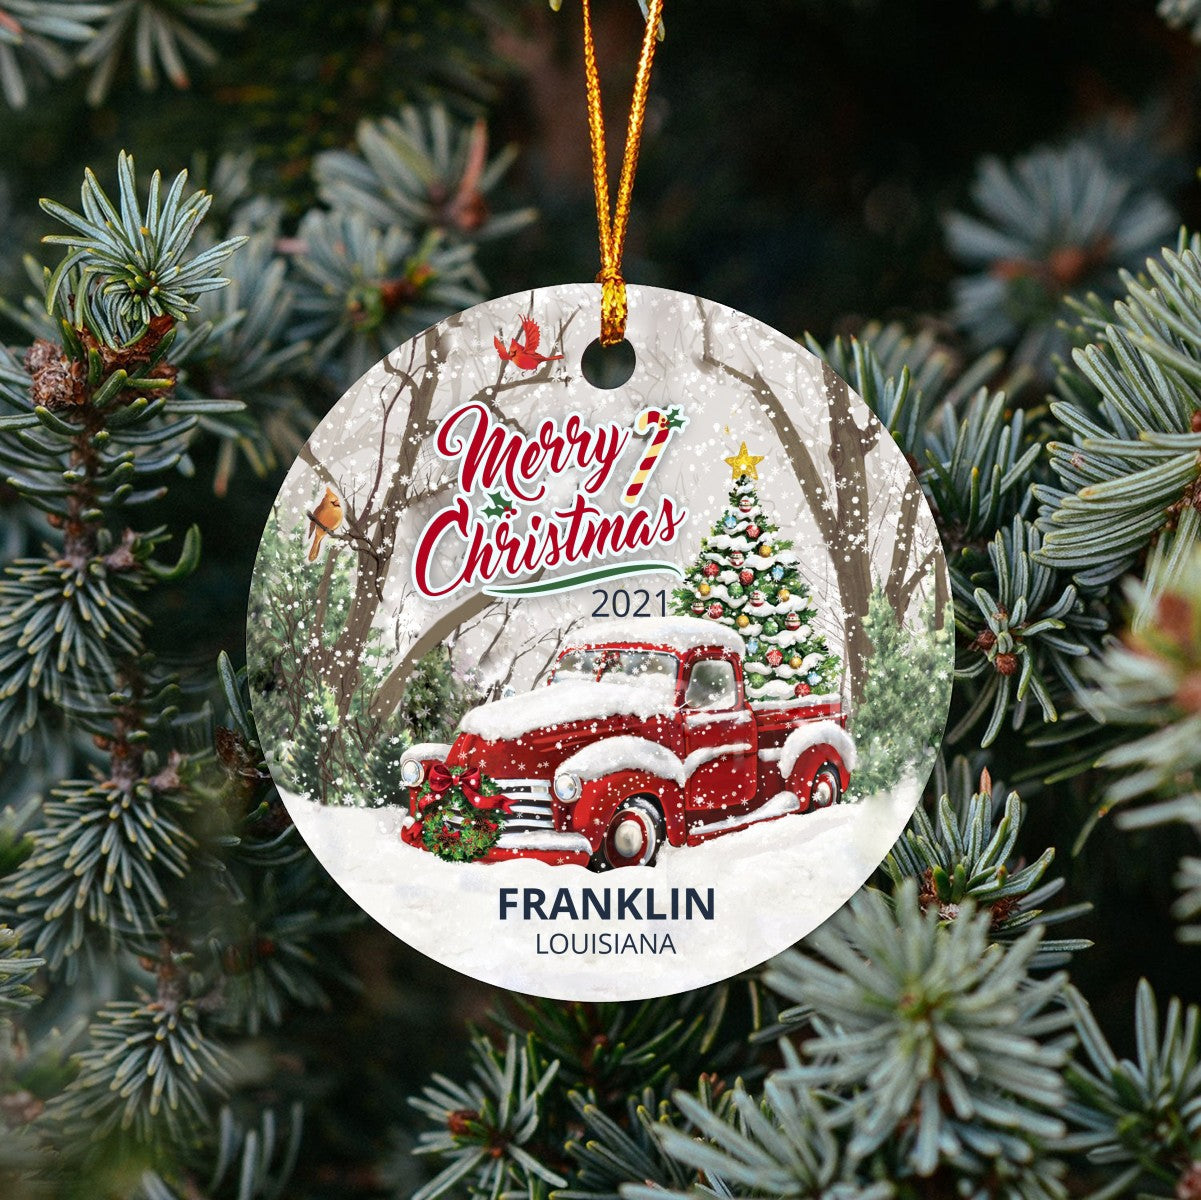 Christmas Tree Ornaments Franklin - Ornament With Name City, State Franklin Louisiana LA Ornament - Red Truck Xmas Ornaments 3'' Plastic Gift For Family, Friend And Housewarming